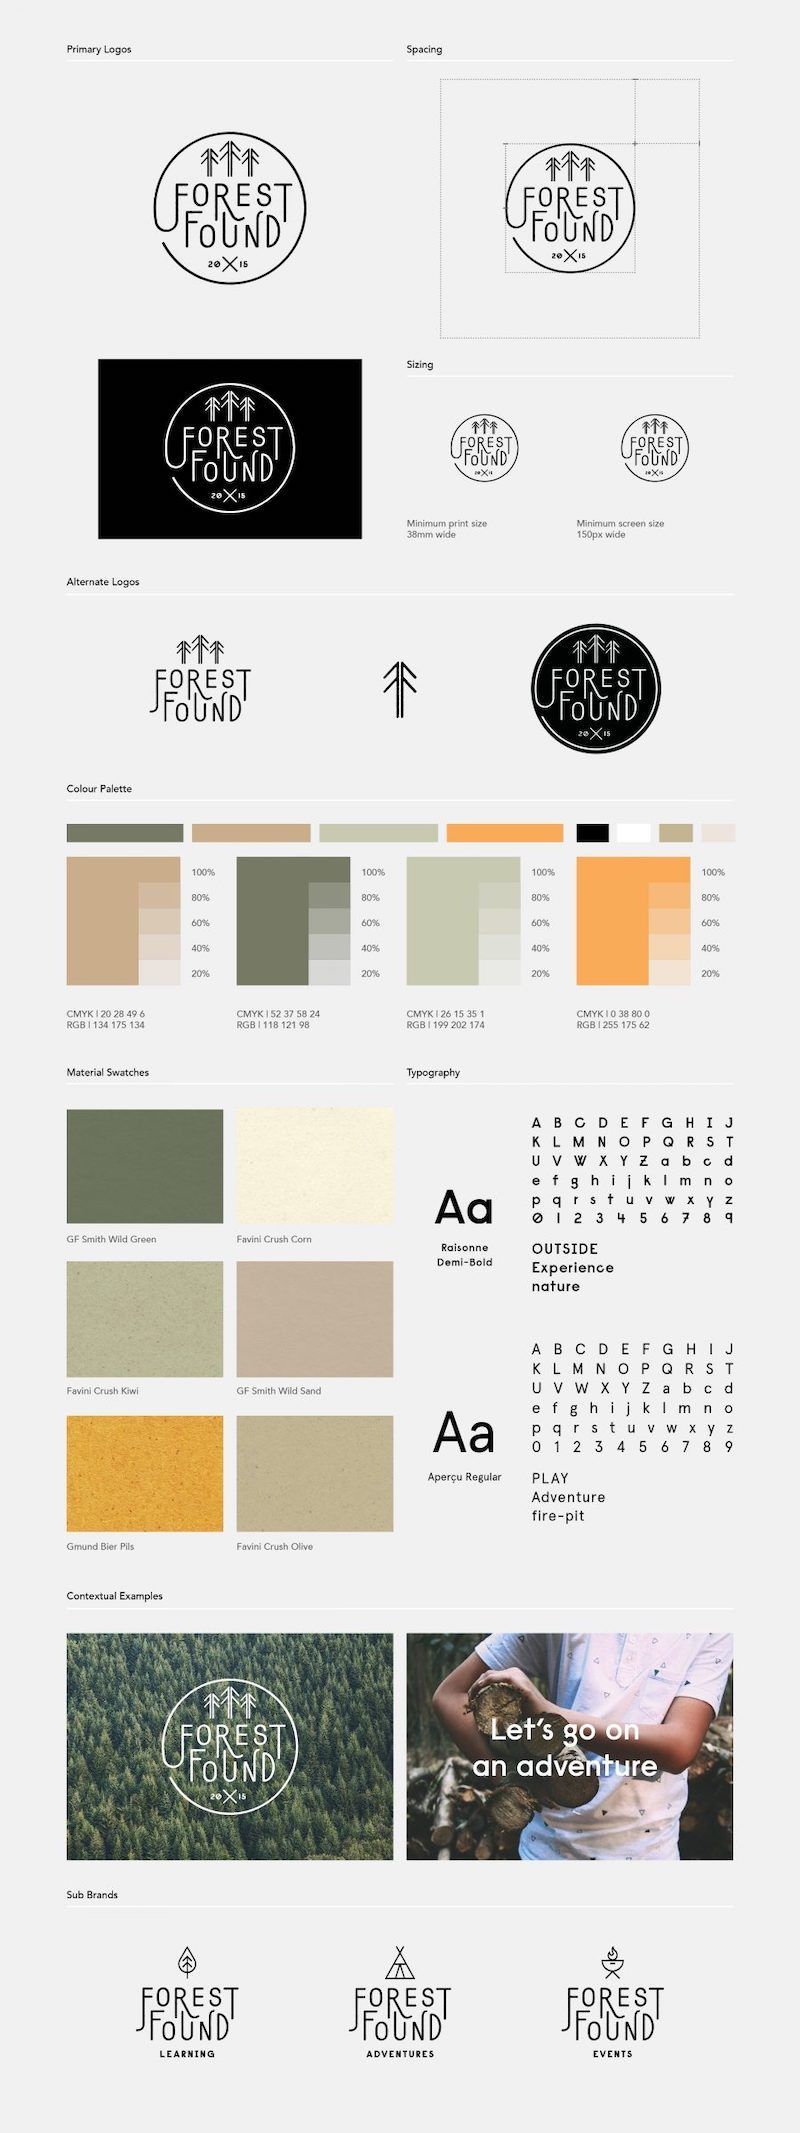 65+ Brand Guidelines Templates, Examples & Tips For Consistent Branding - Venngage - 65+ Brand Guidelines Templates, Examples & Tips For Consistent Branding - Venngage -   19 brand guidelines style Guides ideas